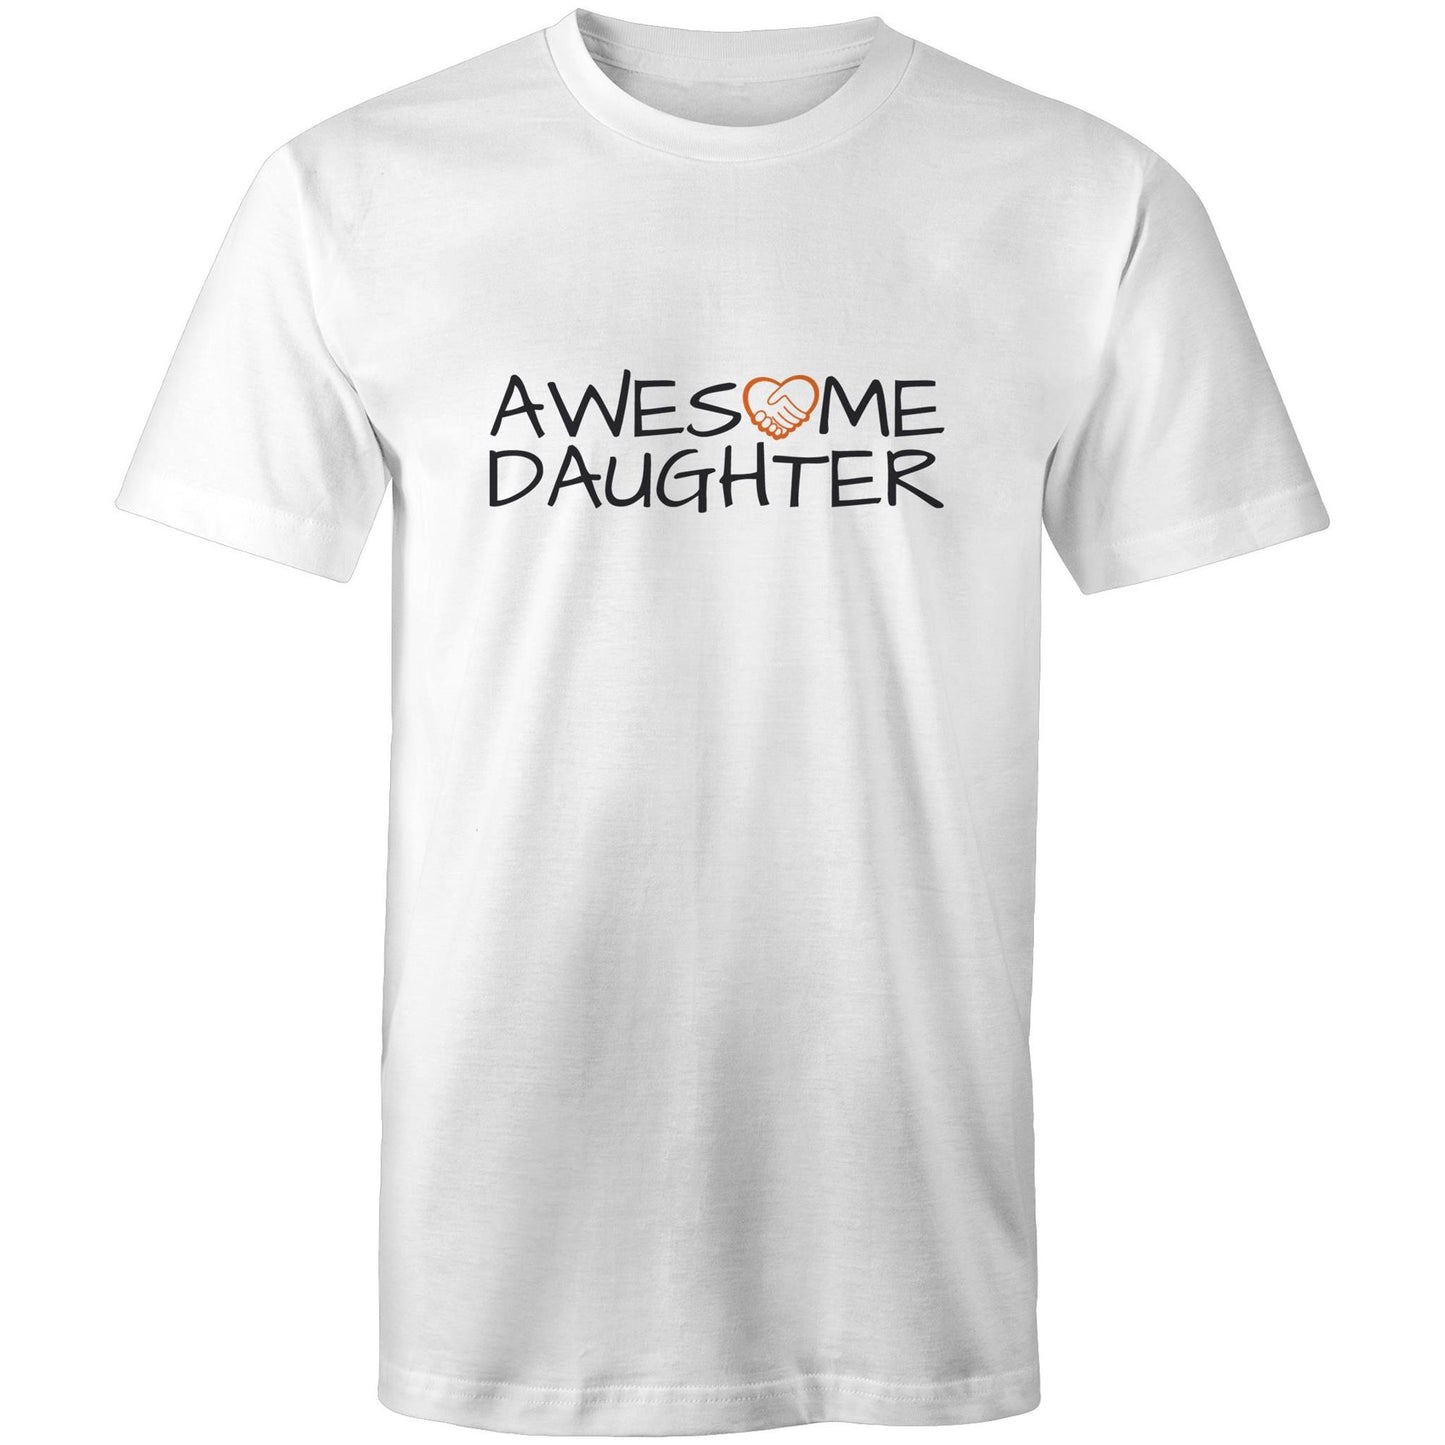 Awesome Daughter T-shirt